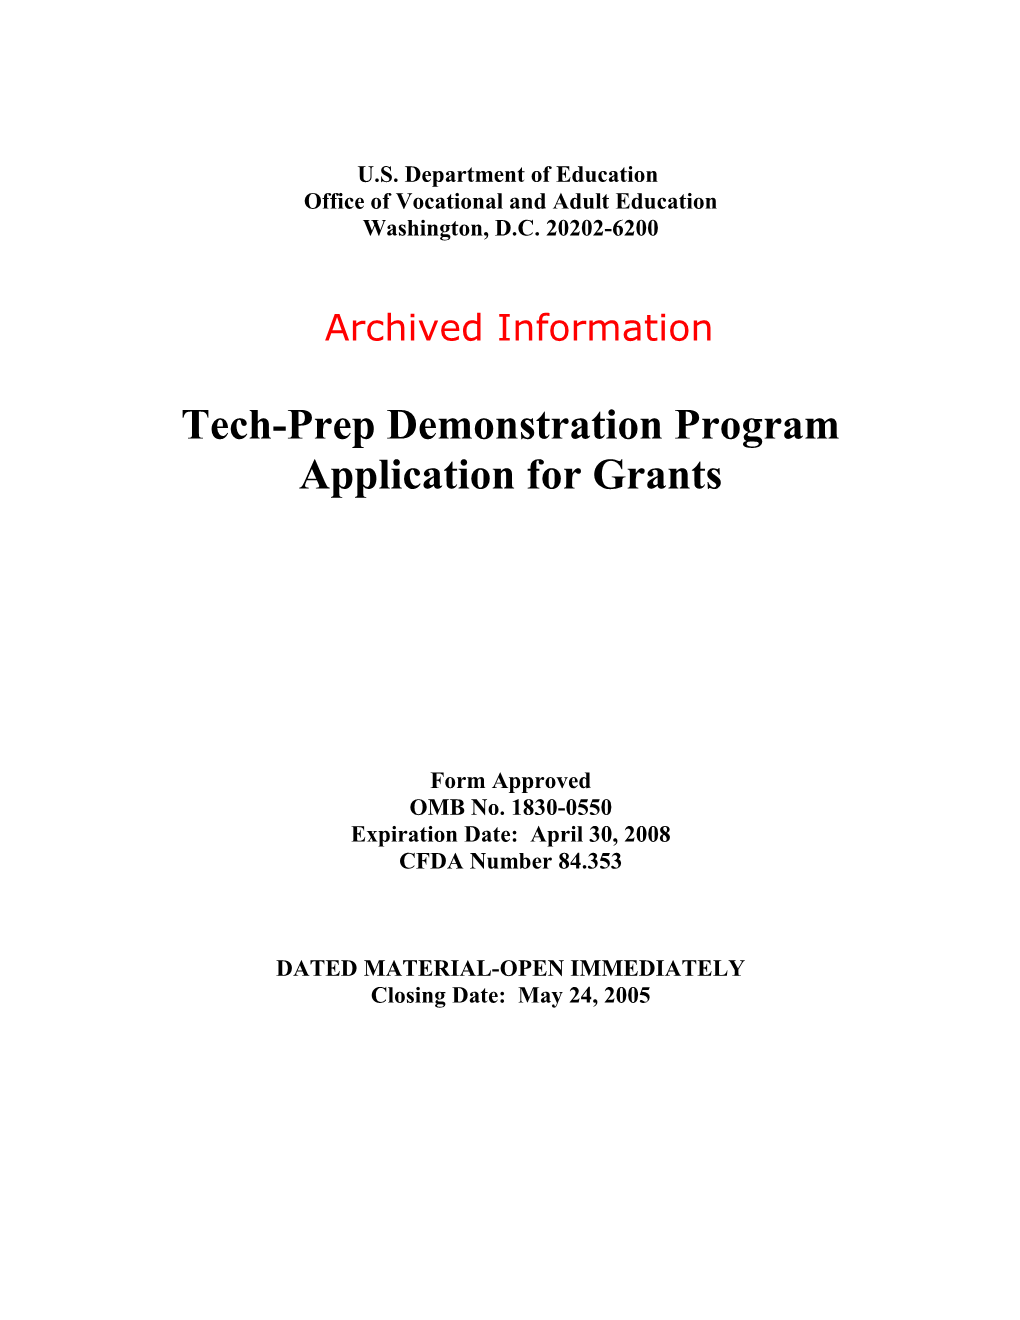 Archived: FY05 Application for the Tech-Prep Demonstration Program (MS Word)